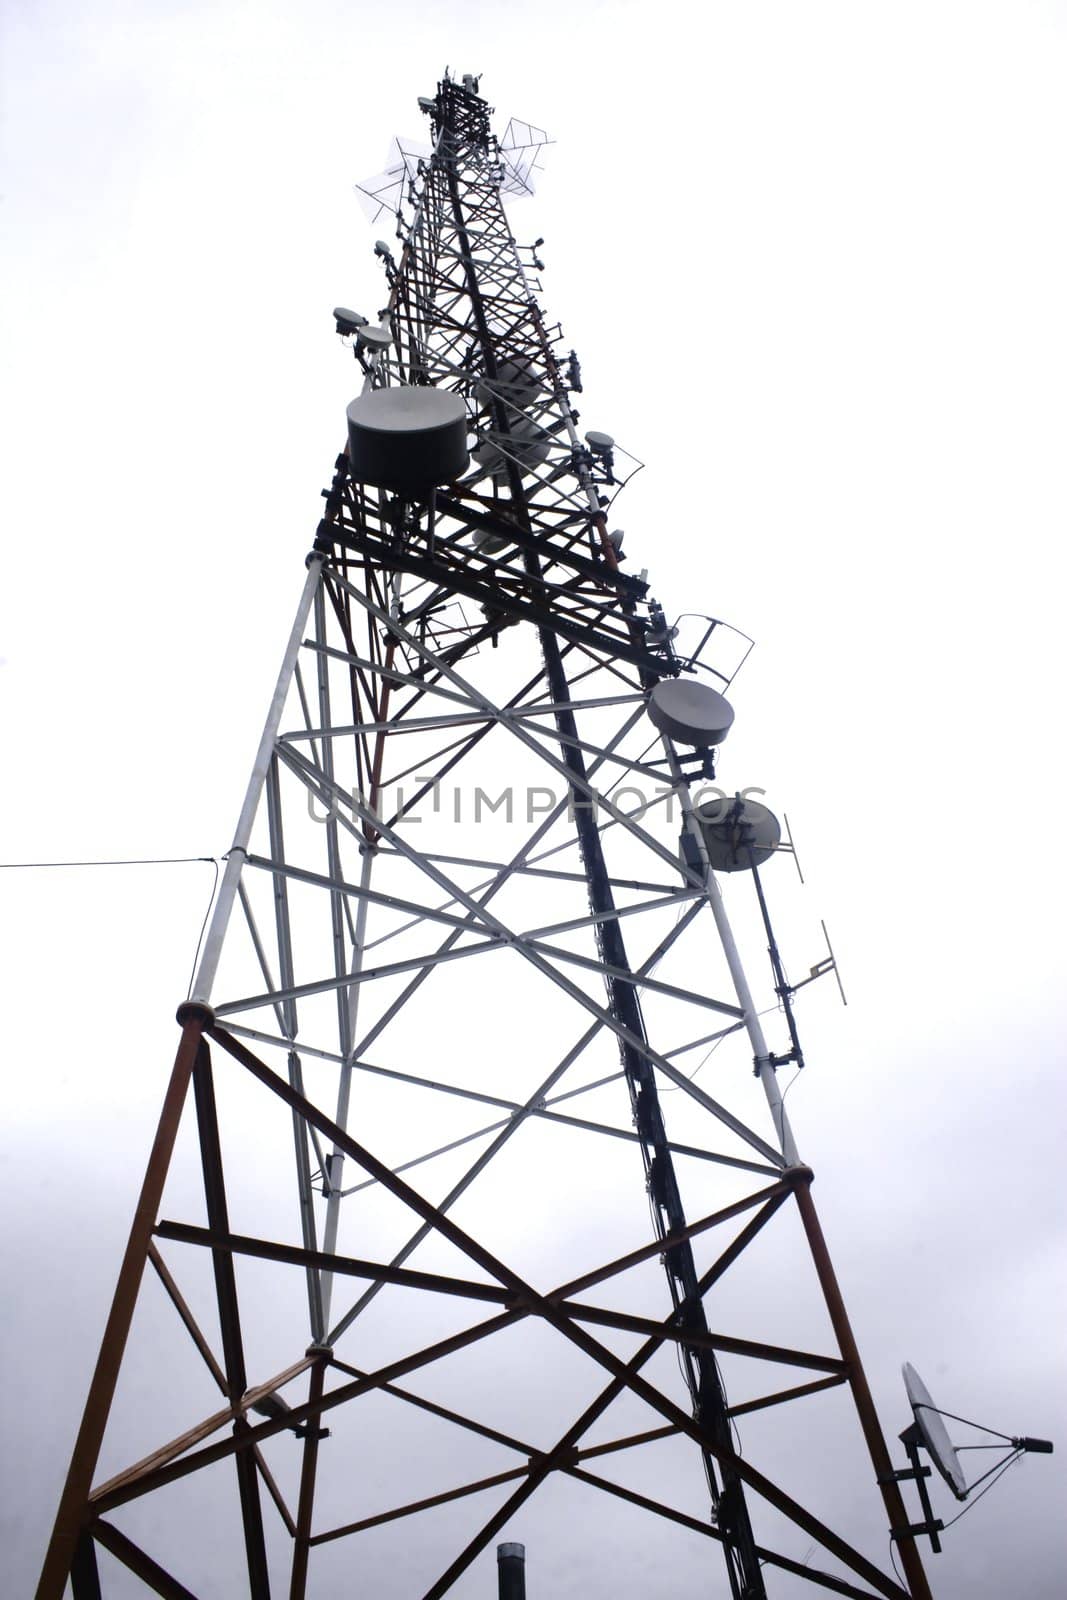 Single communication tower isolated against overcast sky